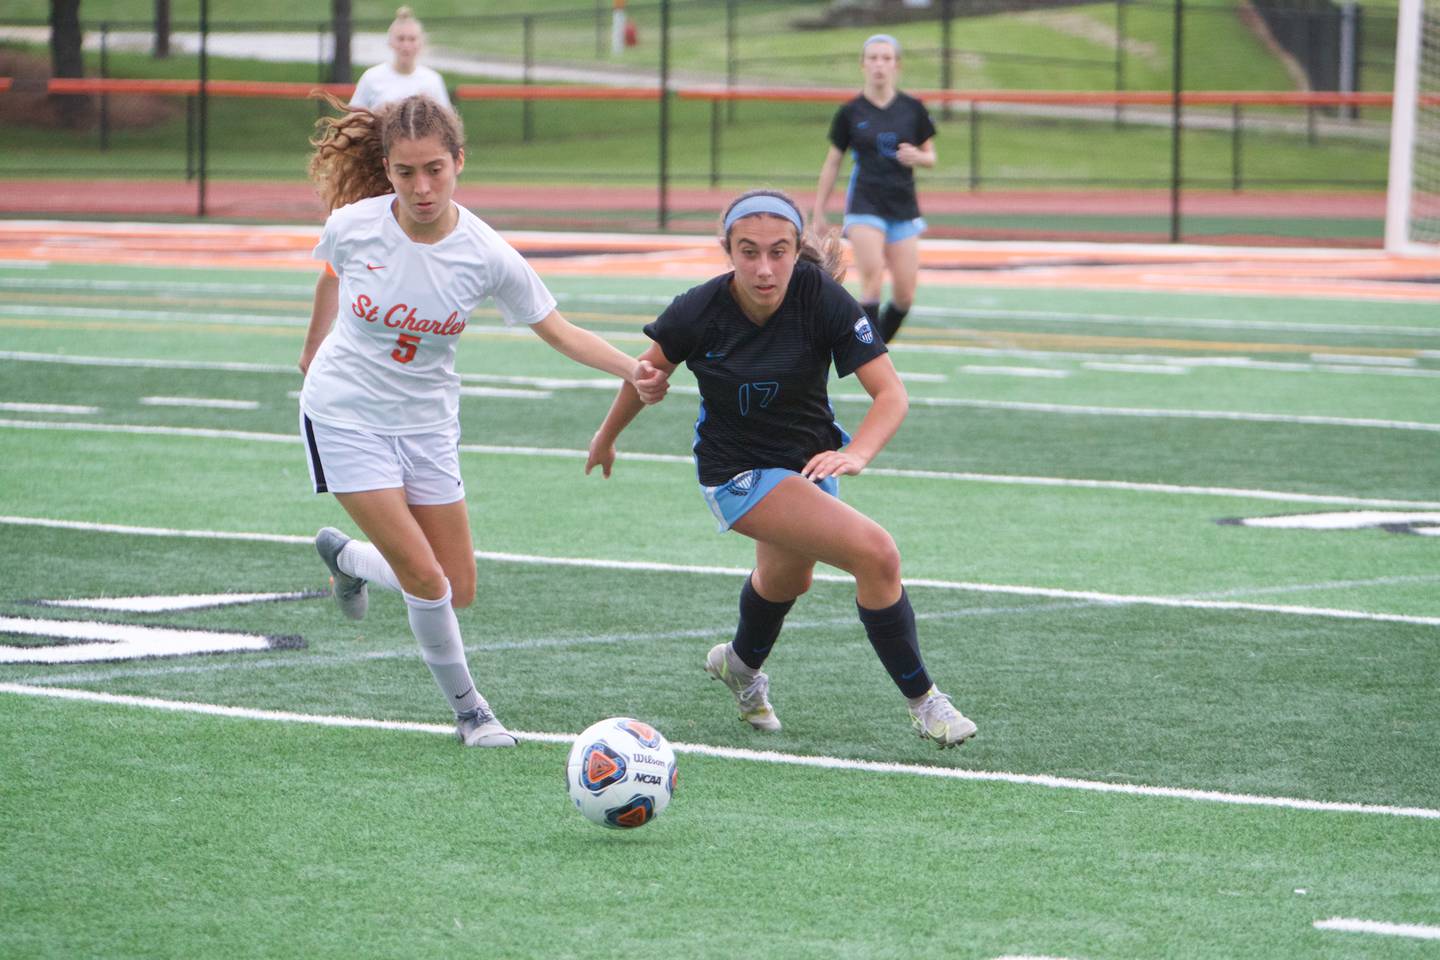 St. Charles North's Bella Najera looks to keep control of the ball from St. Charles East's Yazmin Martinez at the Class 3A Sectional Final on May 27, 2022 in St. Charles.